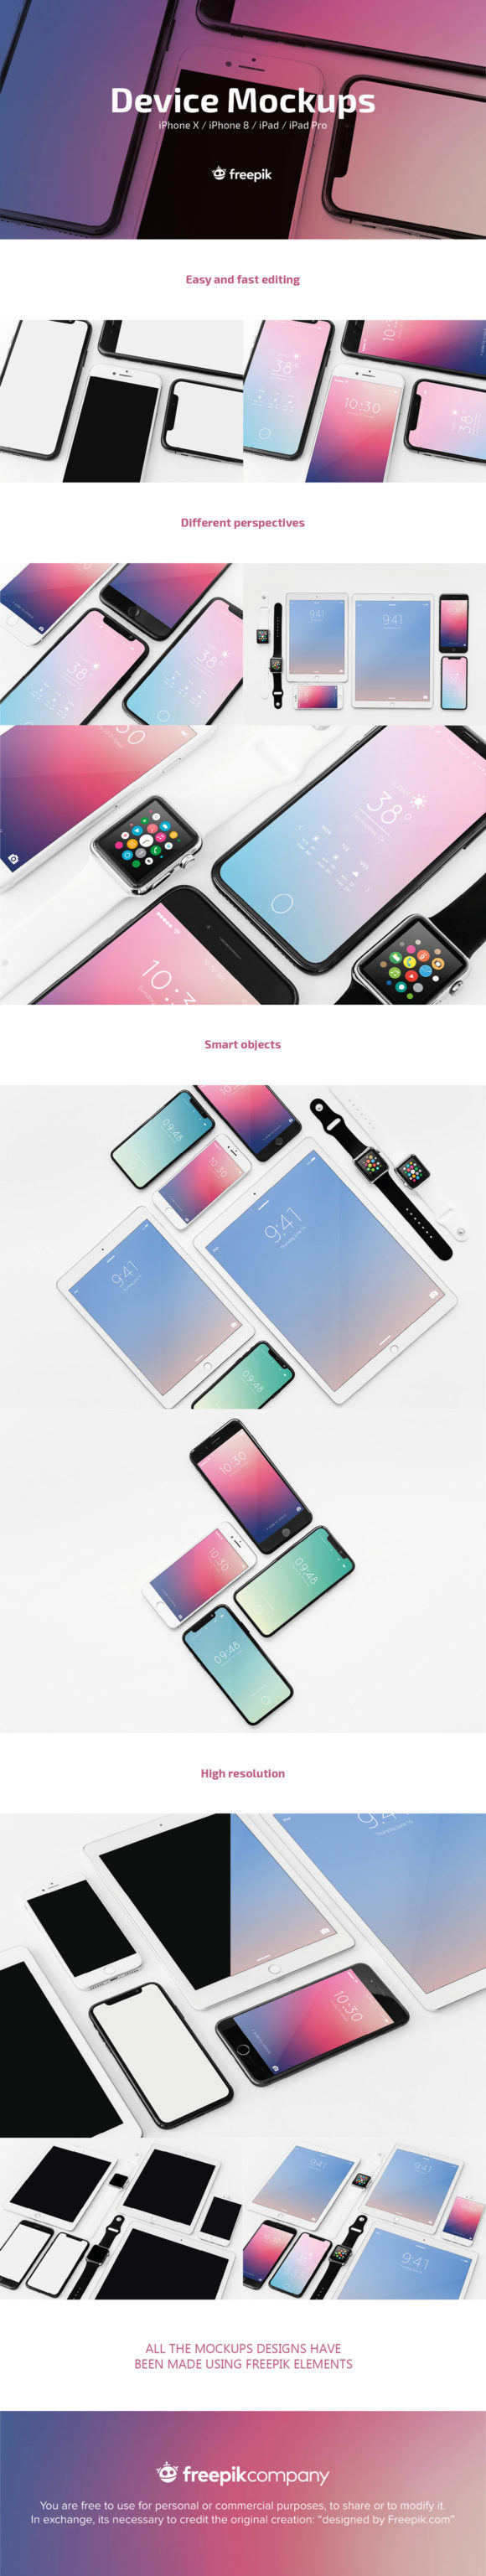 Apple device mockups pack preview